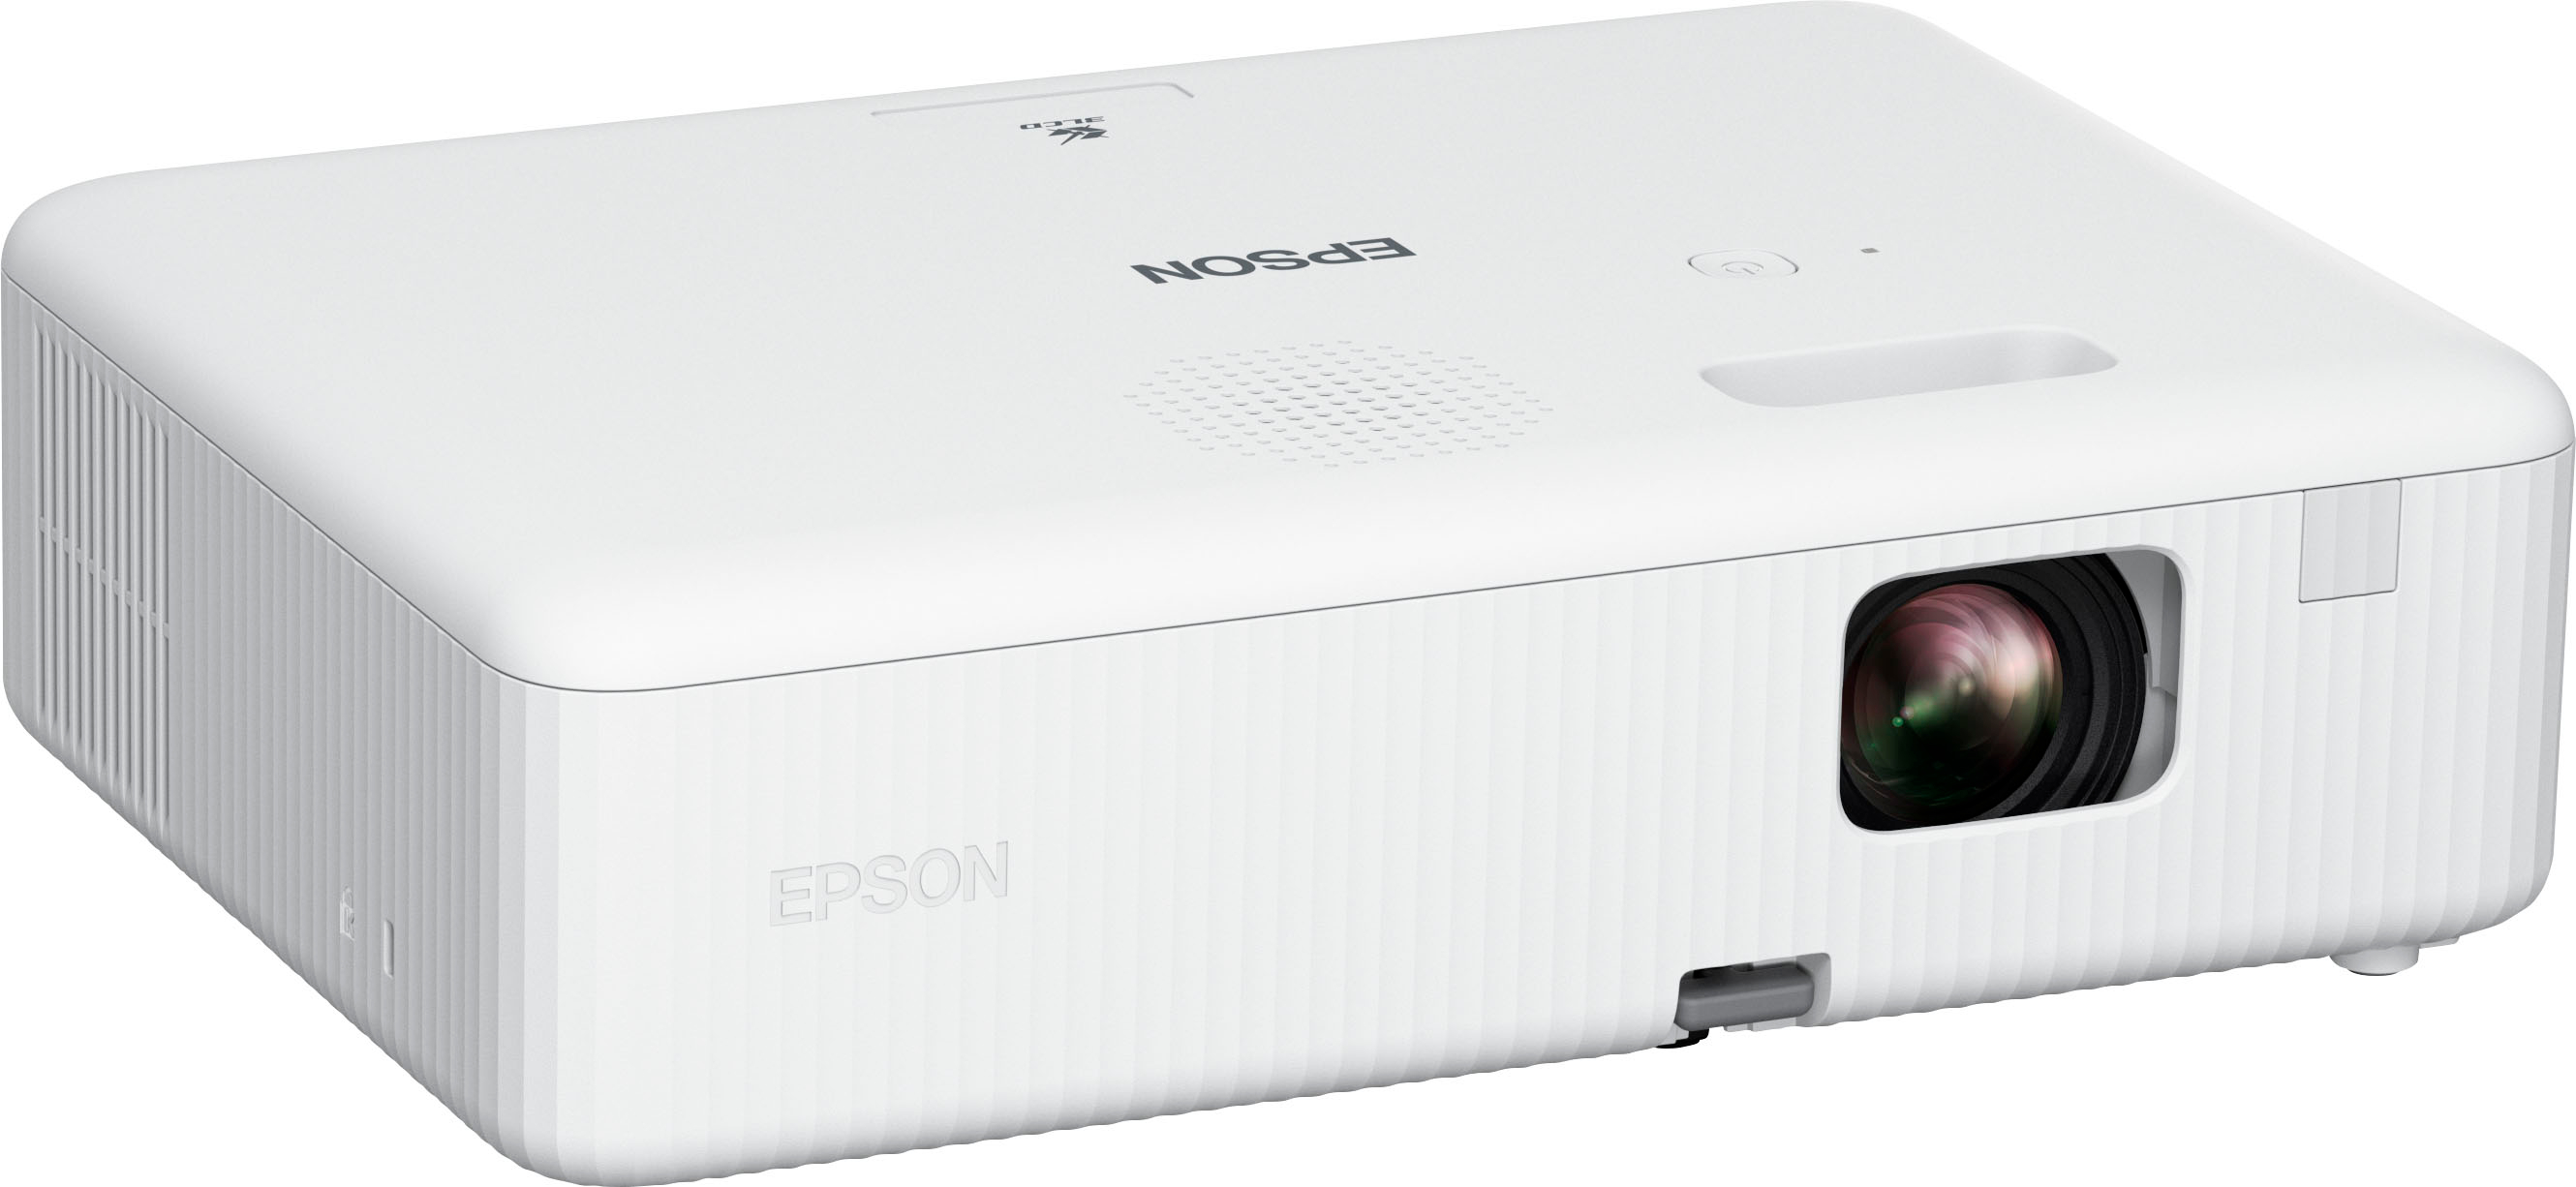 Angle View: Epson - Home Cinema 1080 1080p 3LCD Projector - White